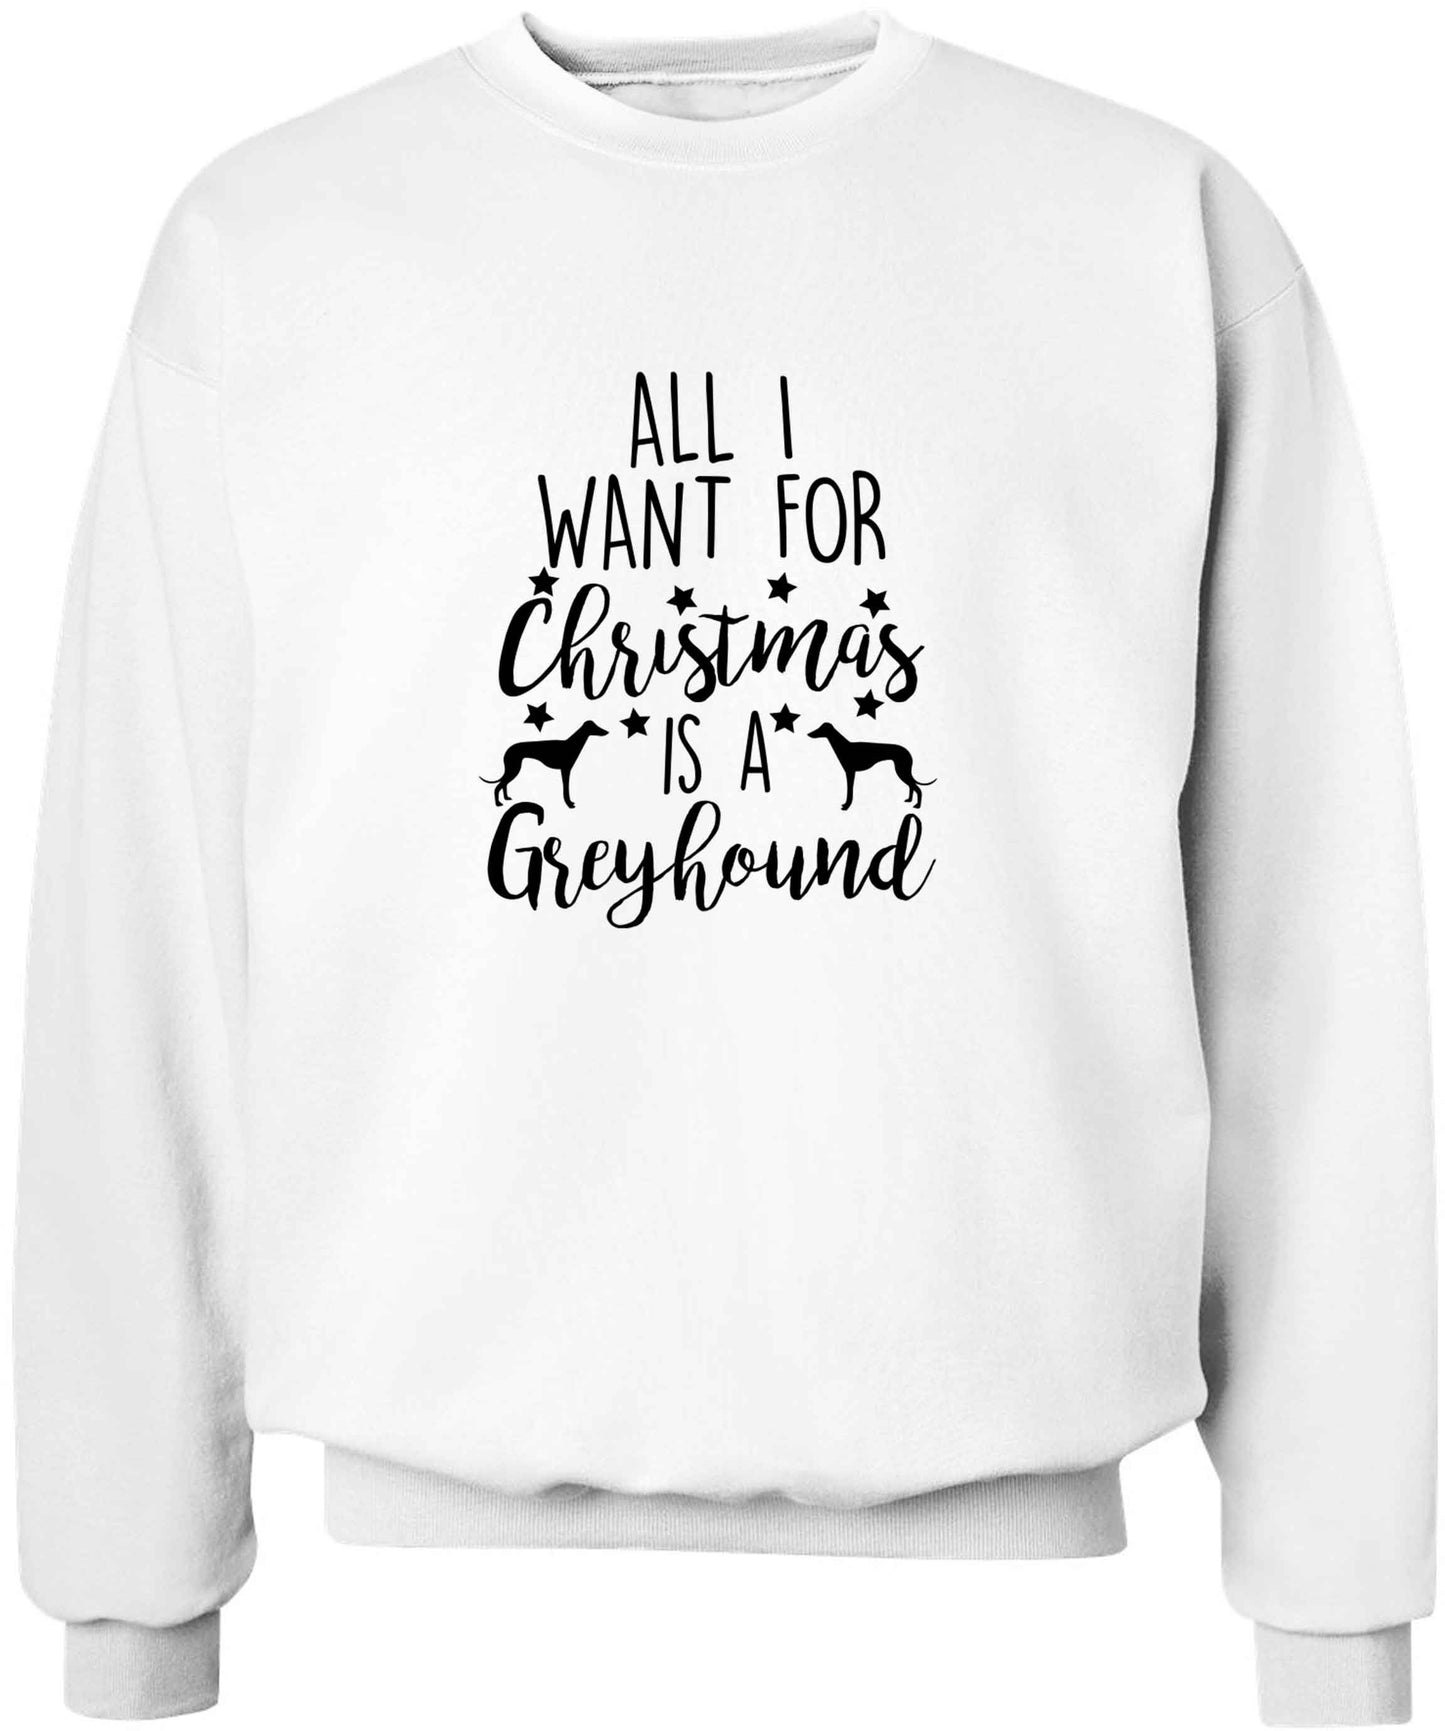 All I want for Christmas is a greyhound adult's unisex white sweater 2XL